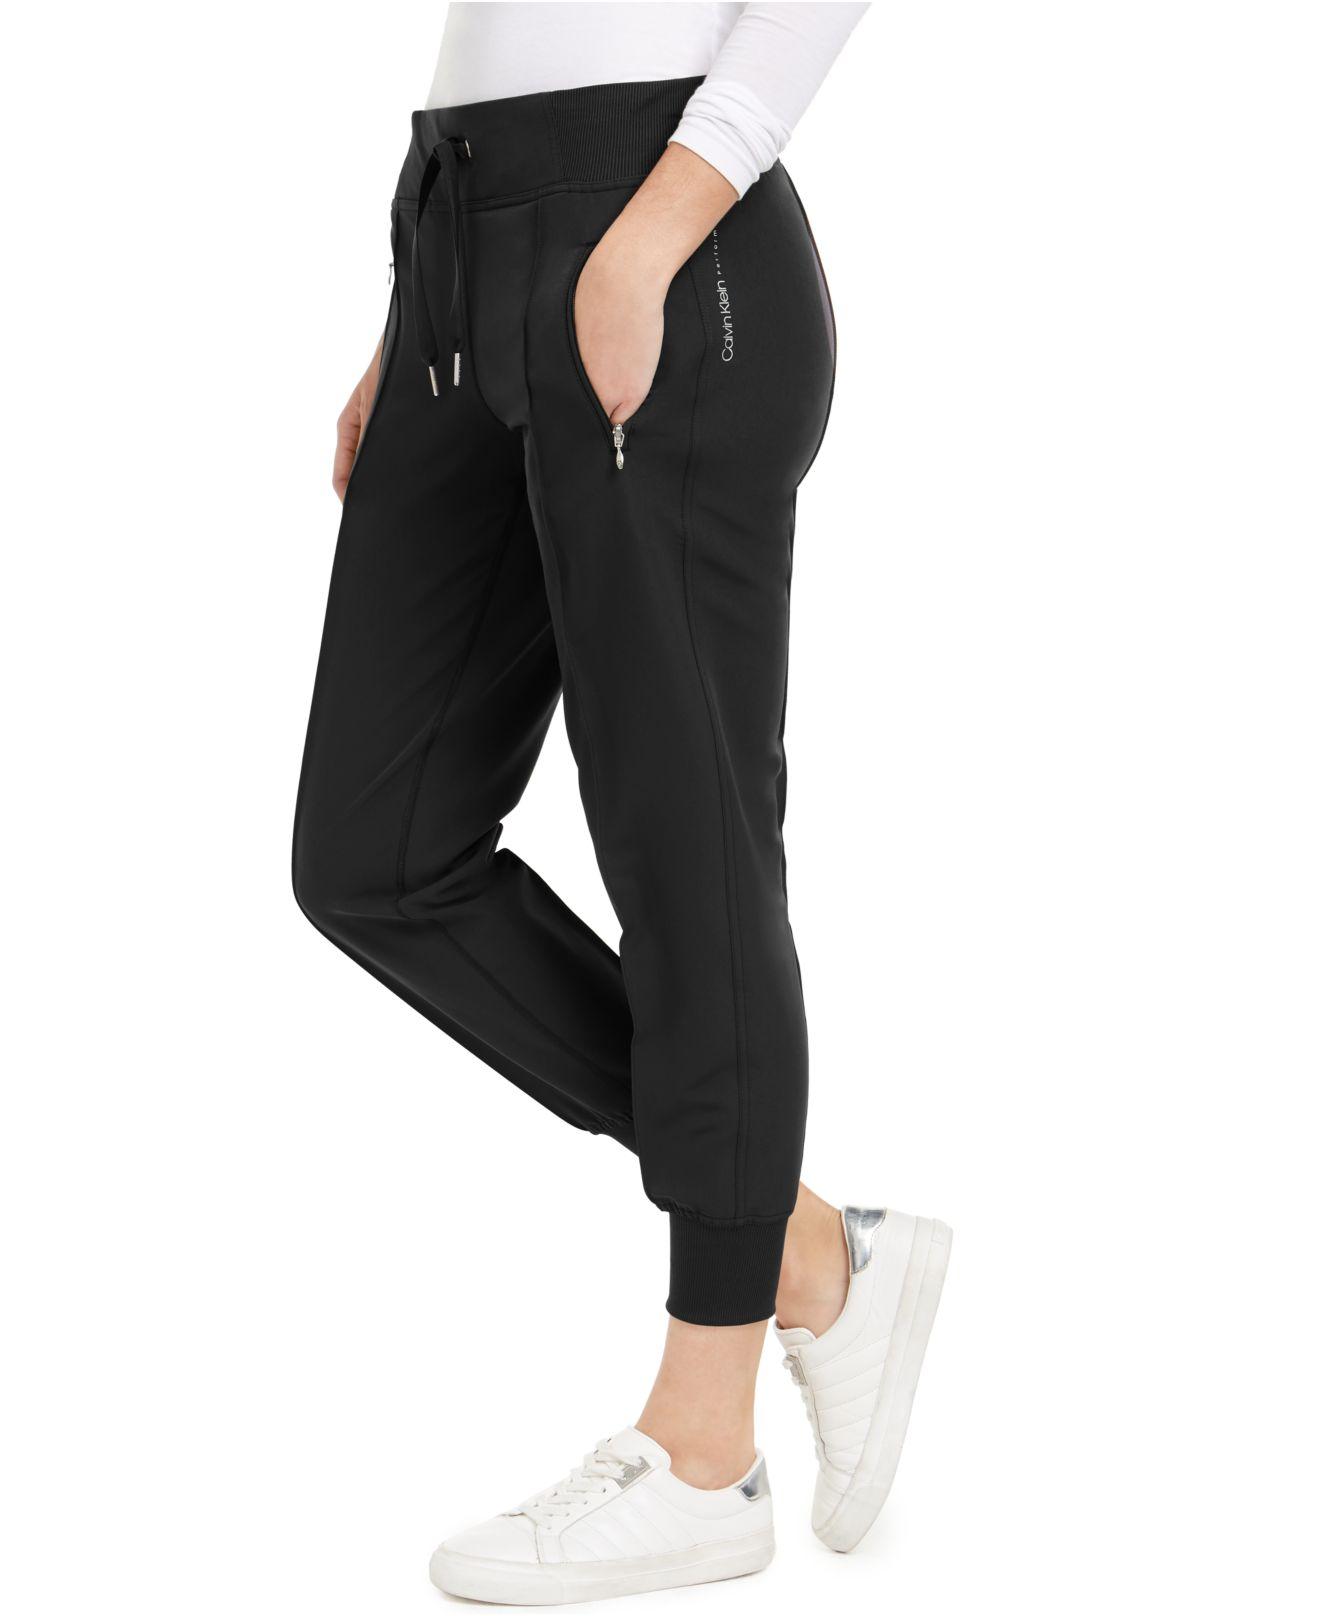 Klein Performance Pintucked Jogger Pants in Black | Lyst